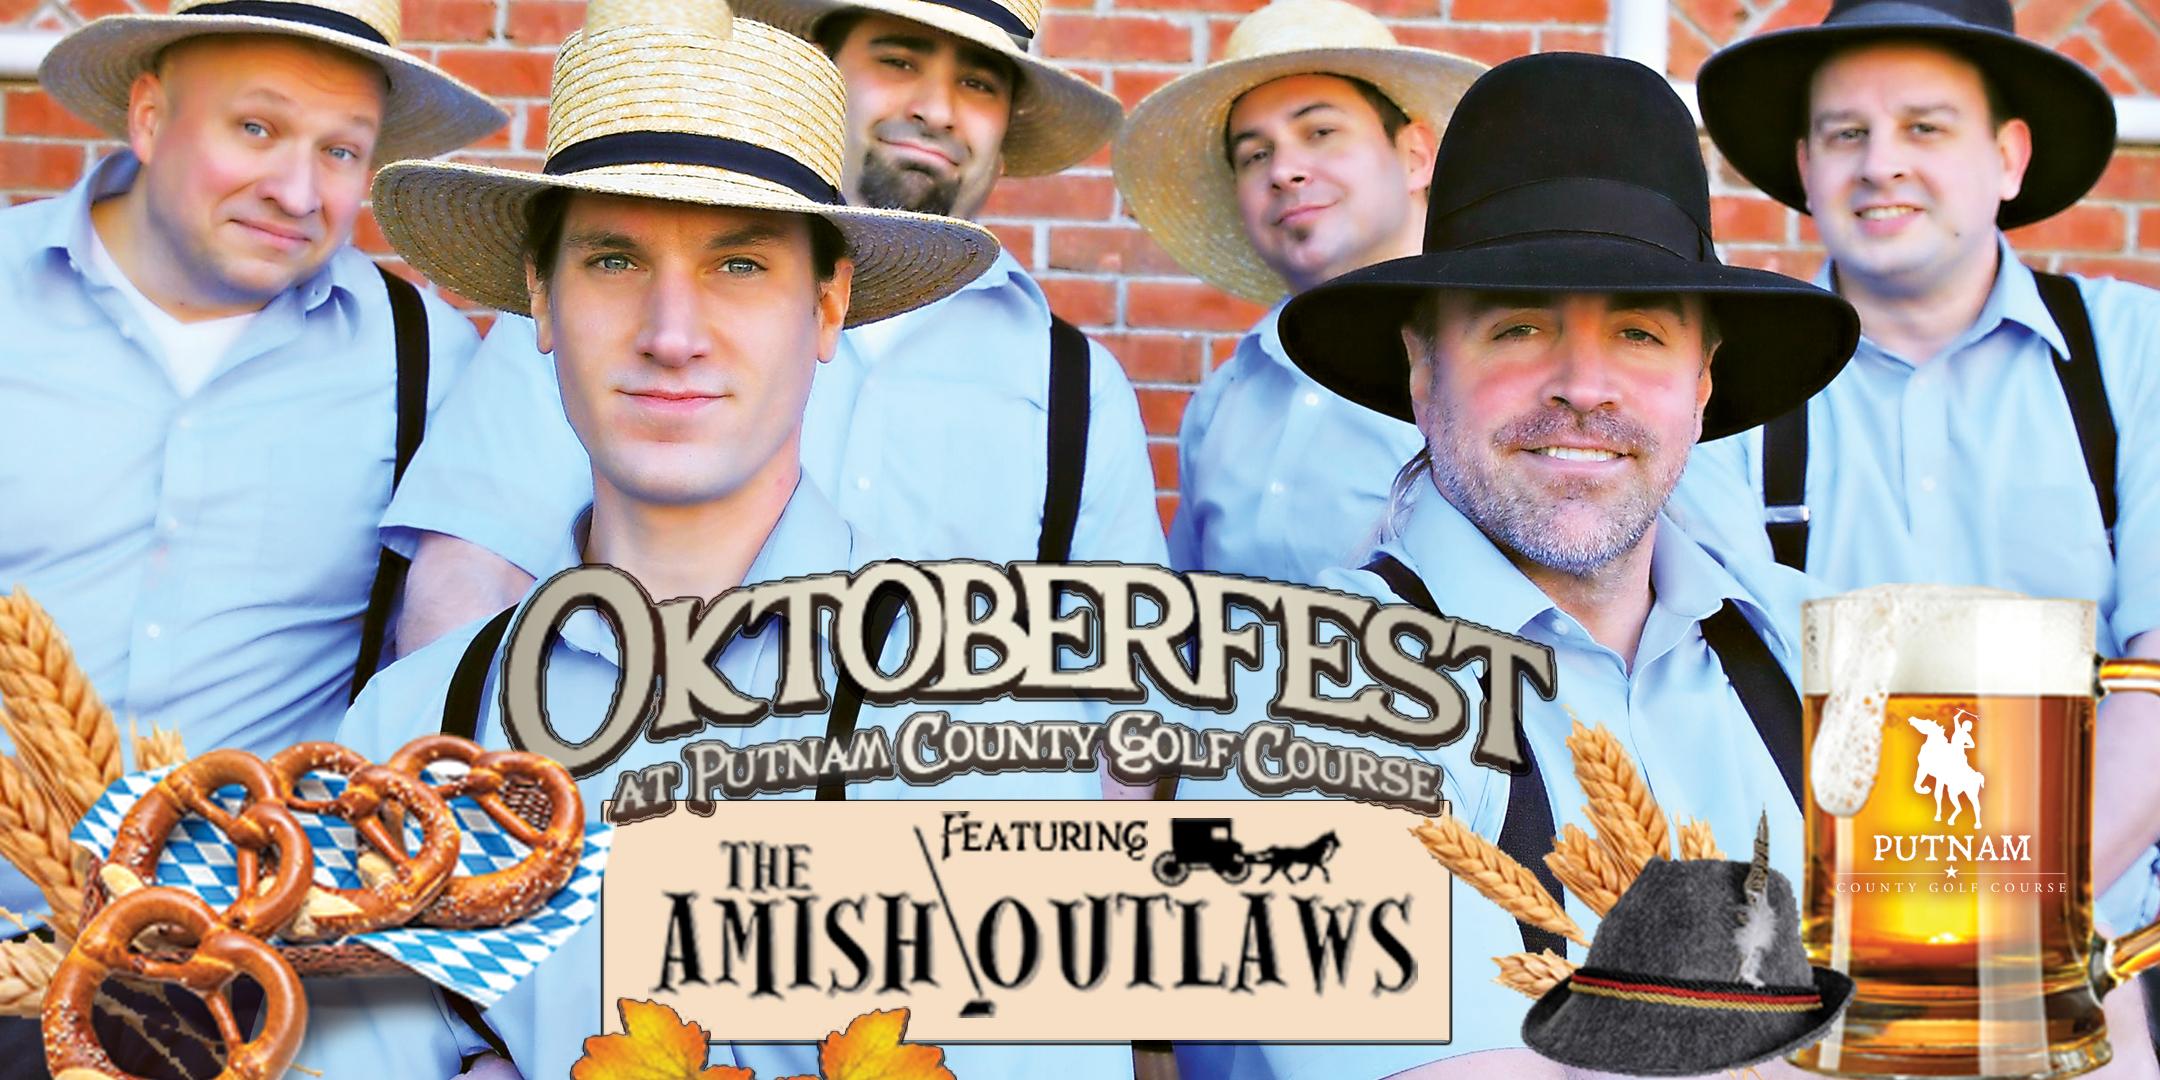 Oktoberfest 2021 at Putnam County Golf Course with